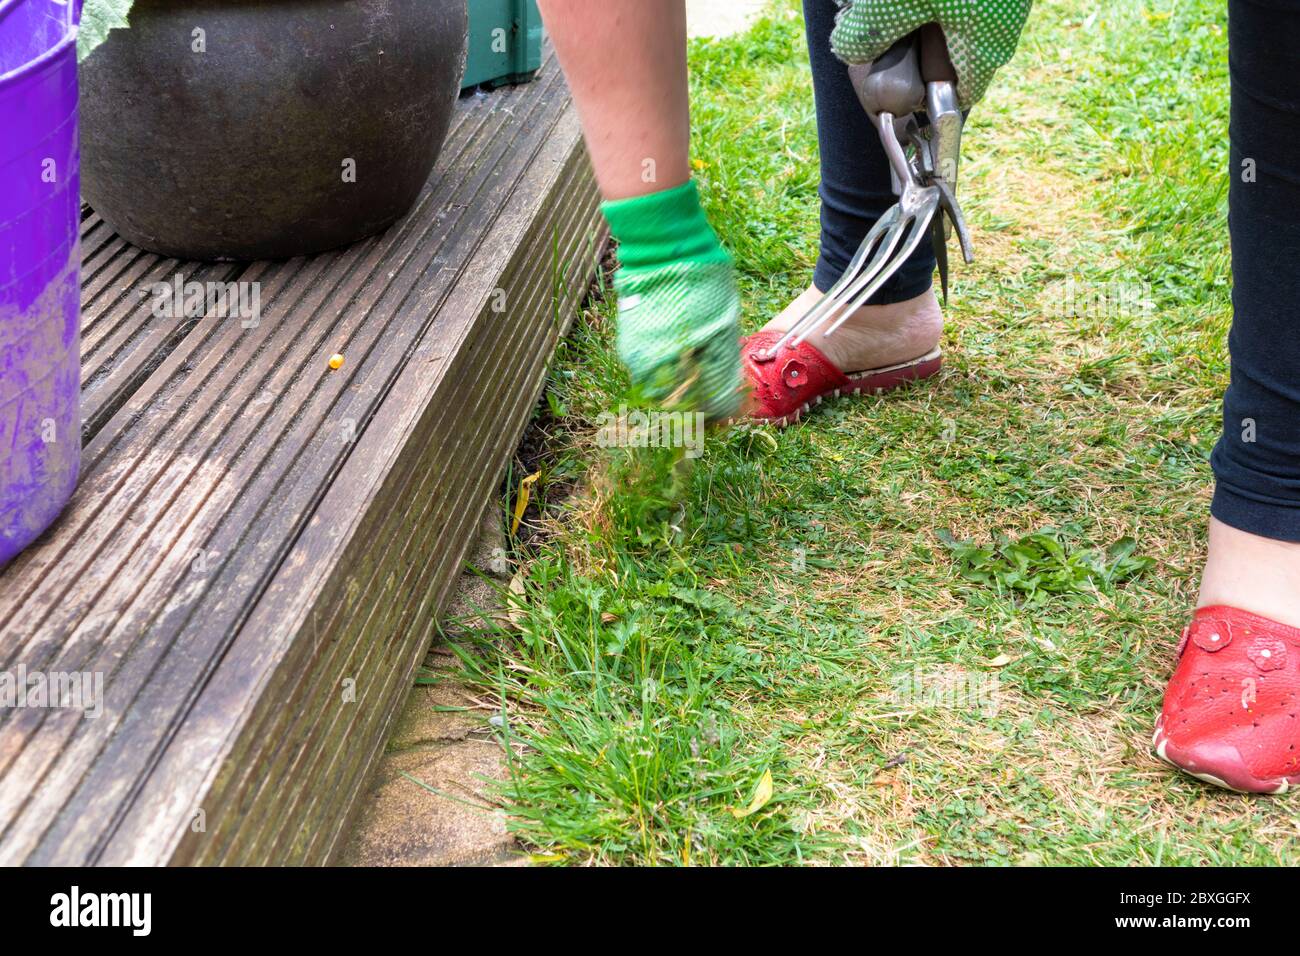 Weeding the garden, woman pulling weeds from a grass verge, uk Stock Photo